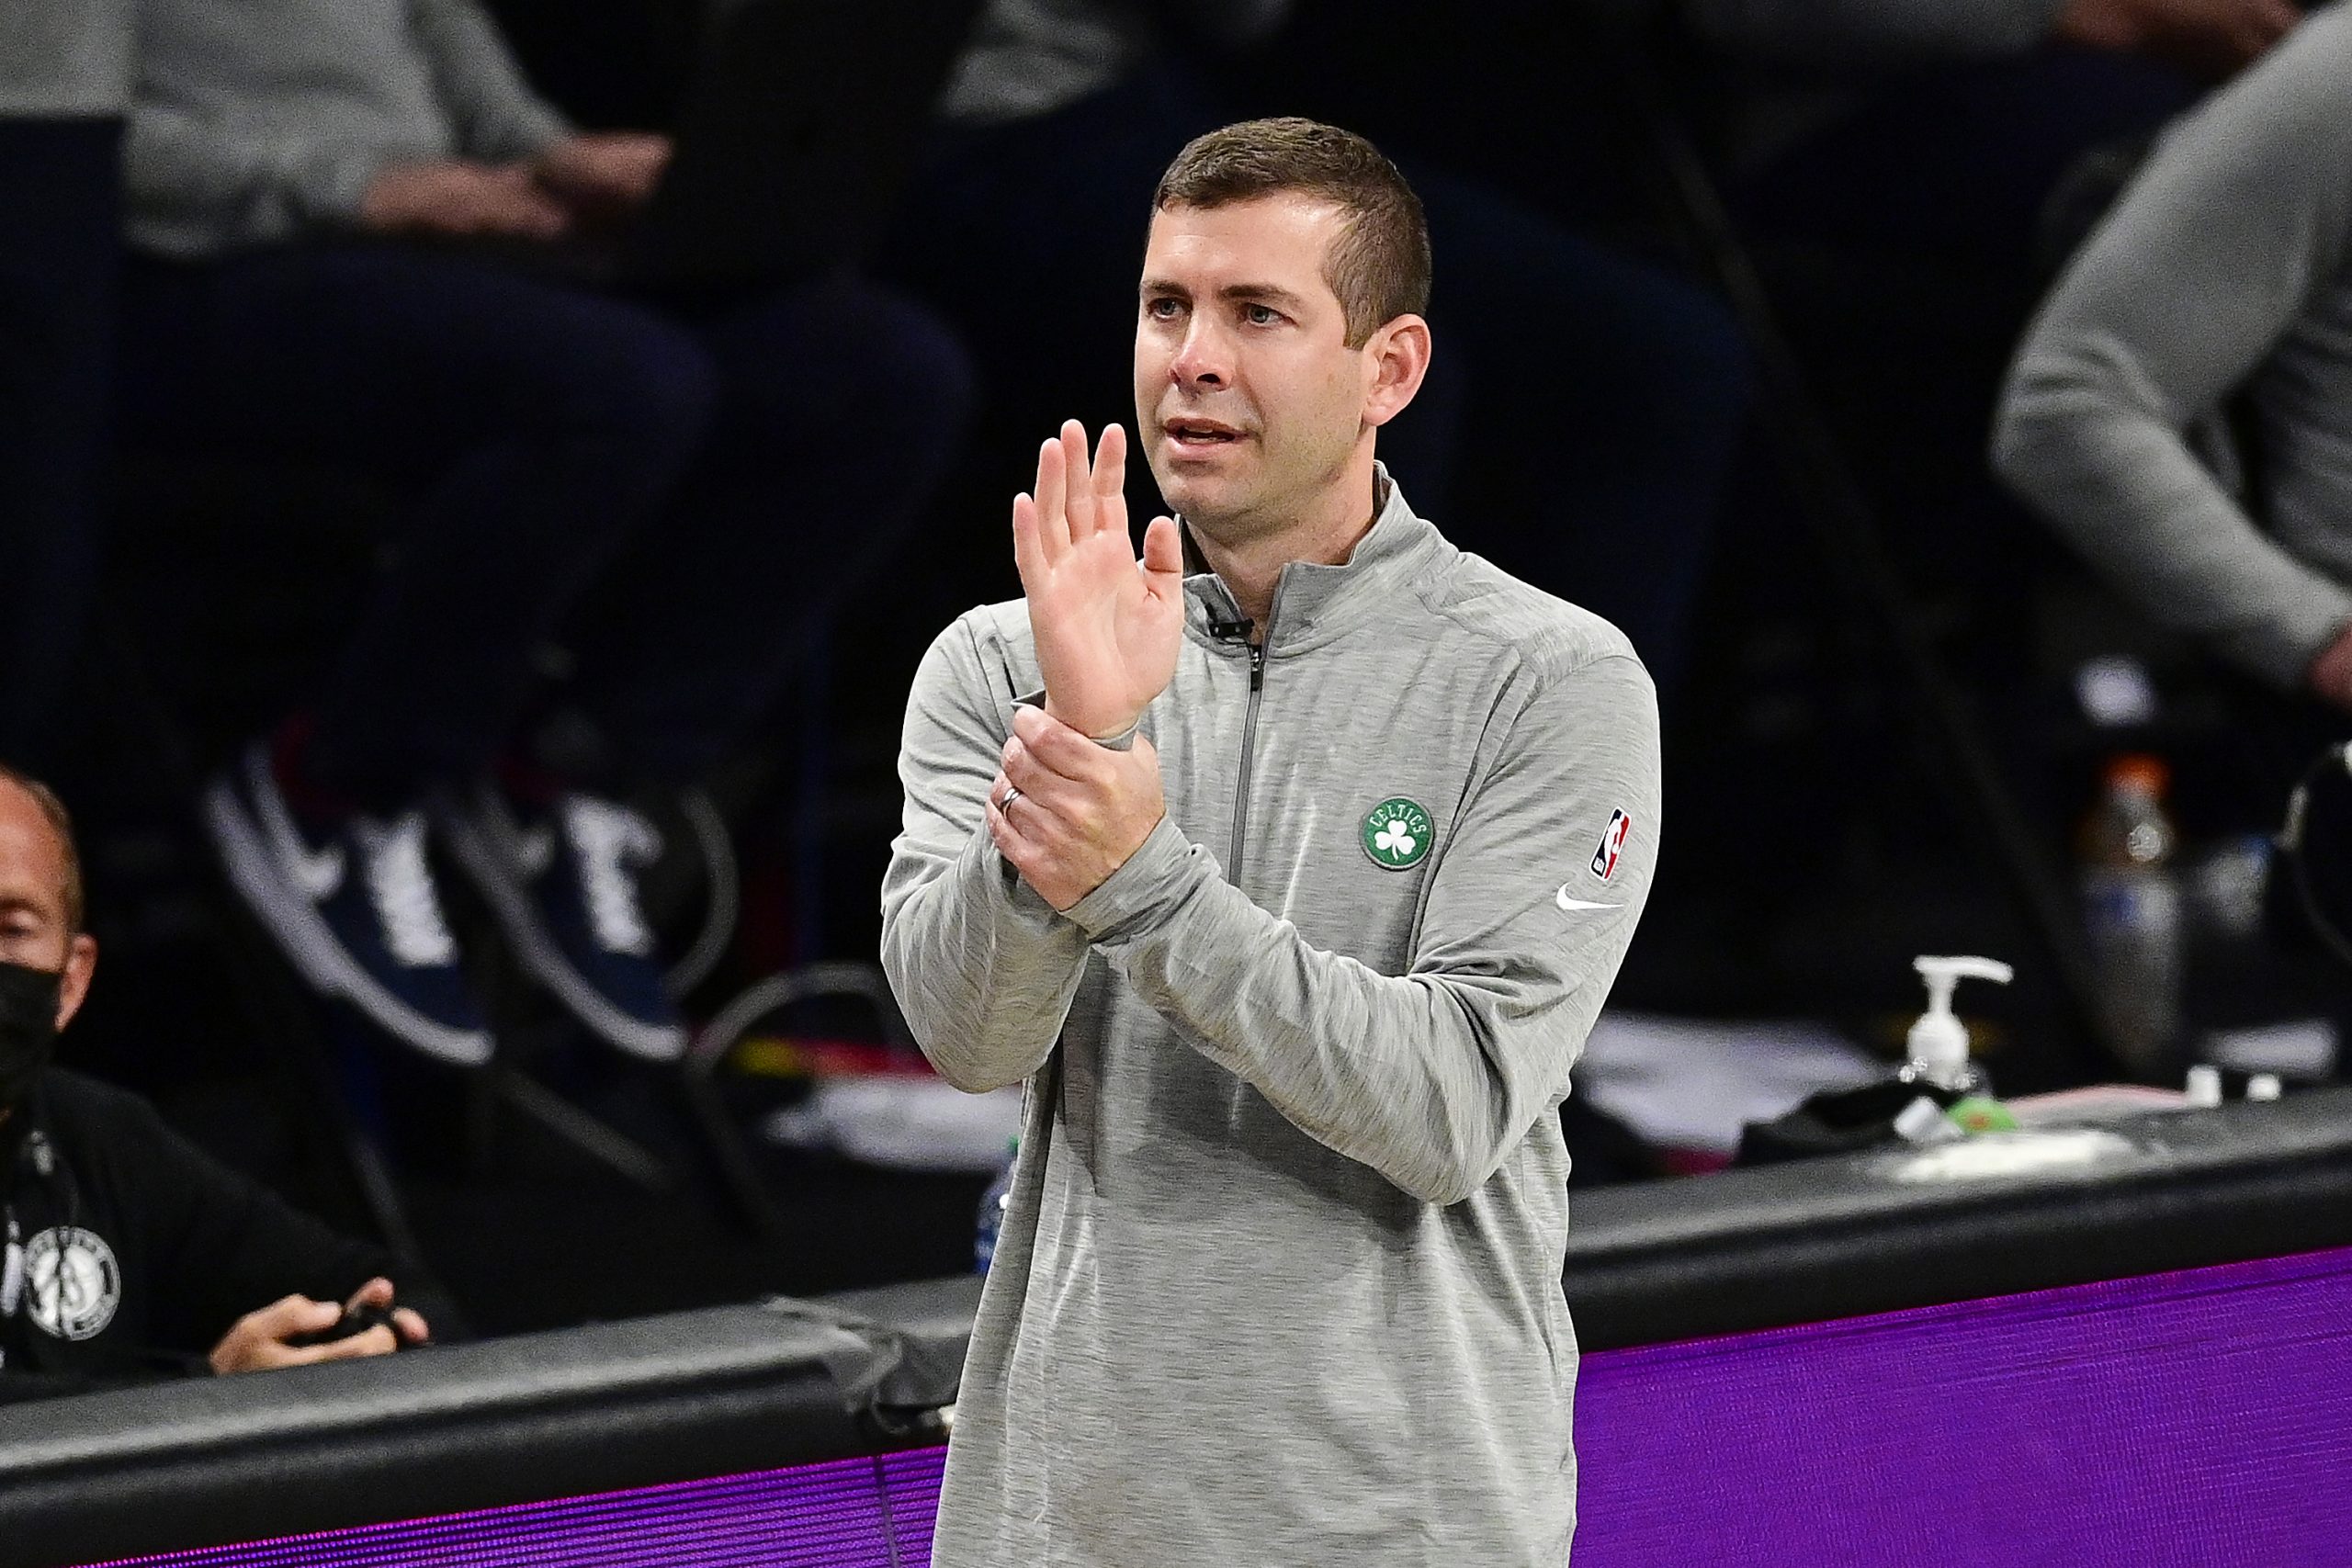 Brad Stevens of the Boston Celtics reacts against the Brooklyn Nets in Game 5 of the First Round of the 2021 NBA Playoffs.